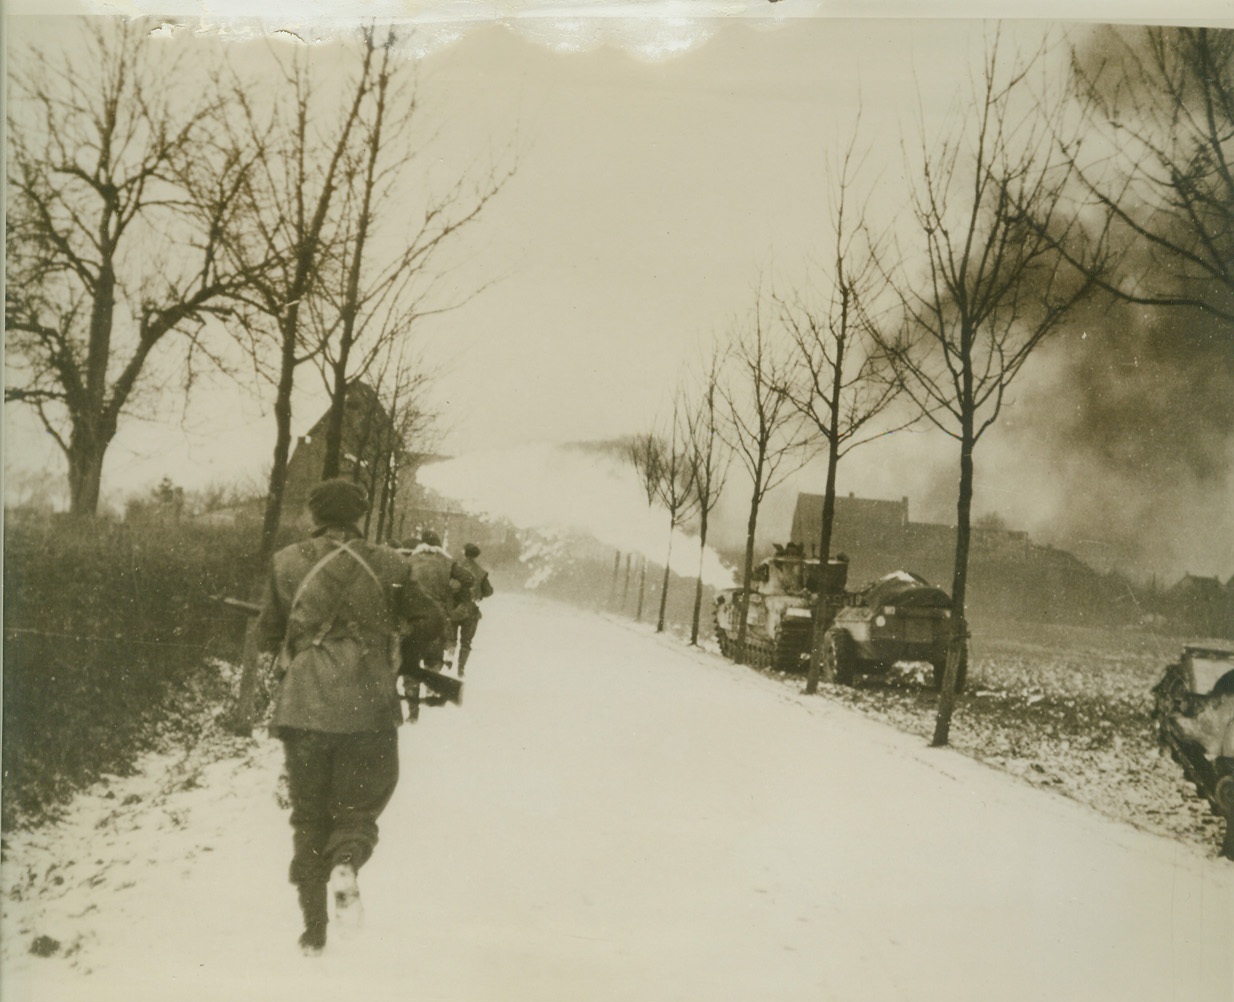 Flame-Throwers Aid British Advance, 1/30/1945. HOLLAND -- A crocodile flame-thrower fires at enemy positions as British infantrymen move along the road to St. Joost, in the Sittard battle area. Tommies faced stiff resistance before taking the village. Credit (British Official Photo from ACME);